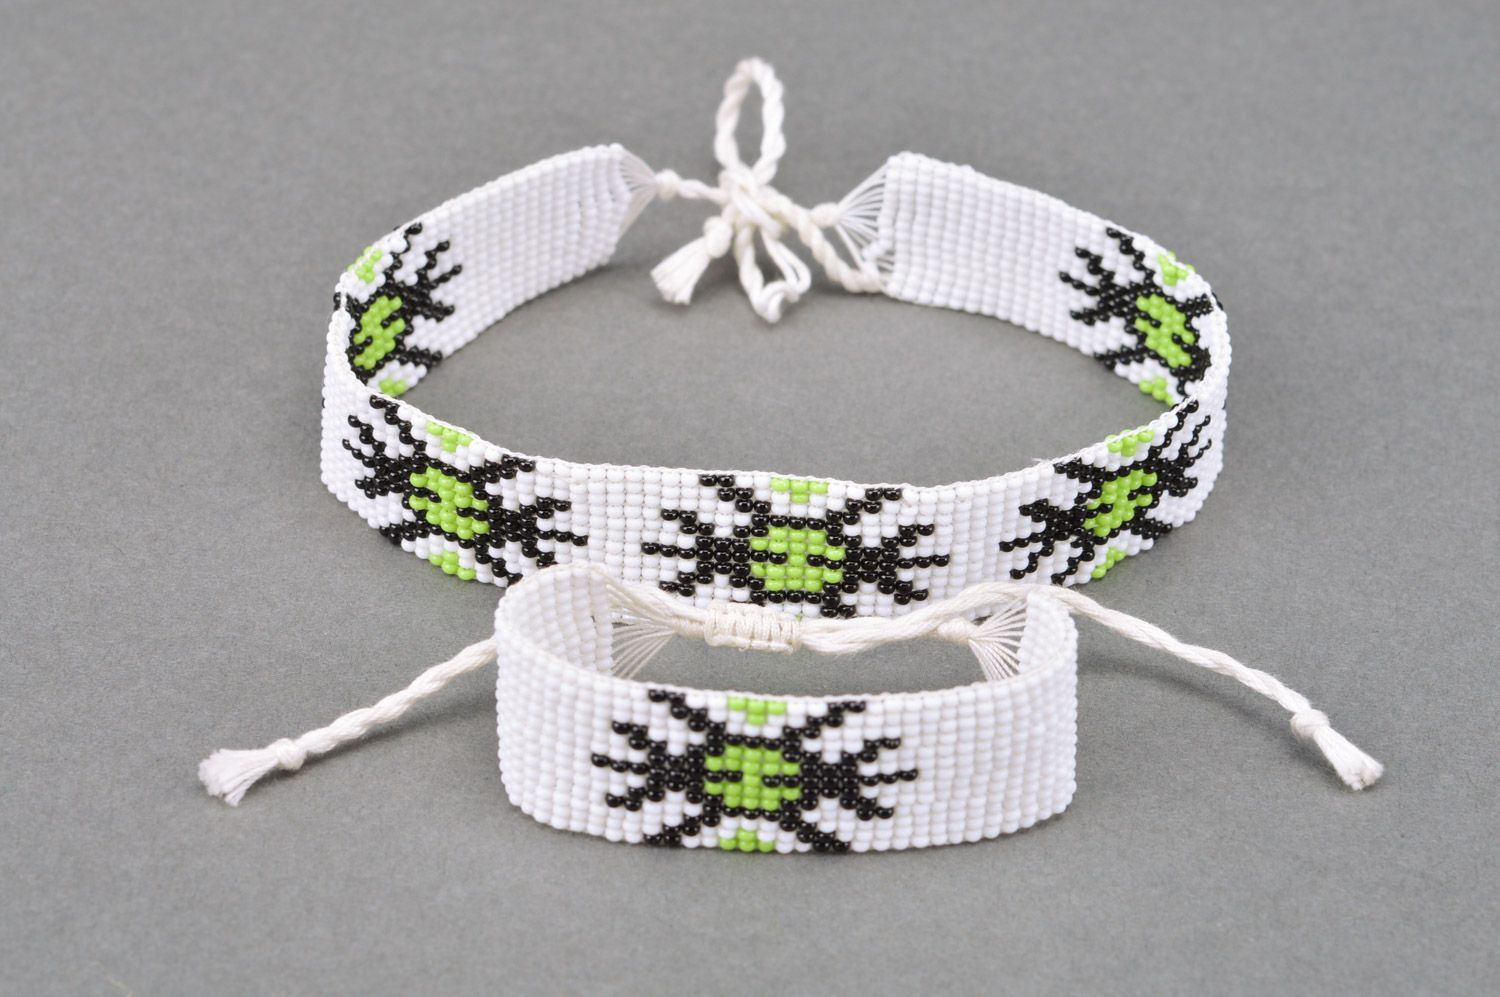 White and green handmade jewelry set 2 items bracelet and necklace woven of Czech beads photo 2